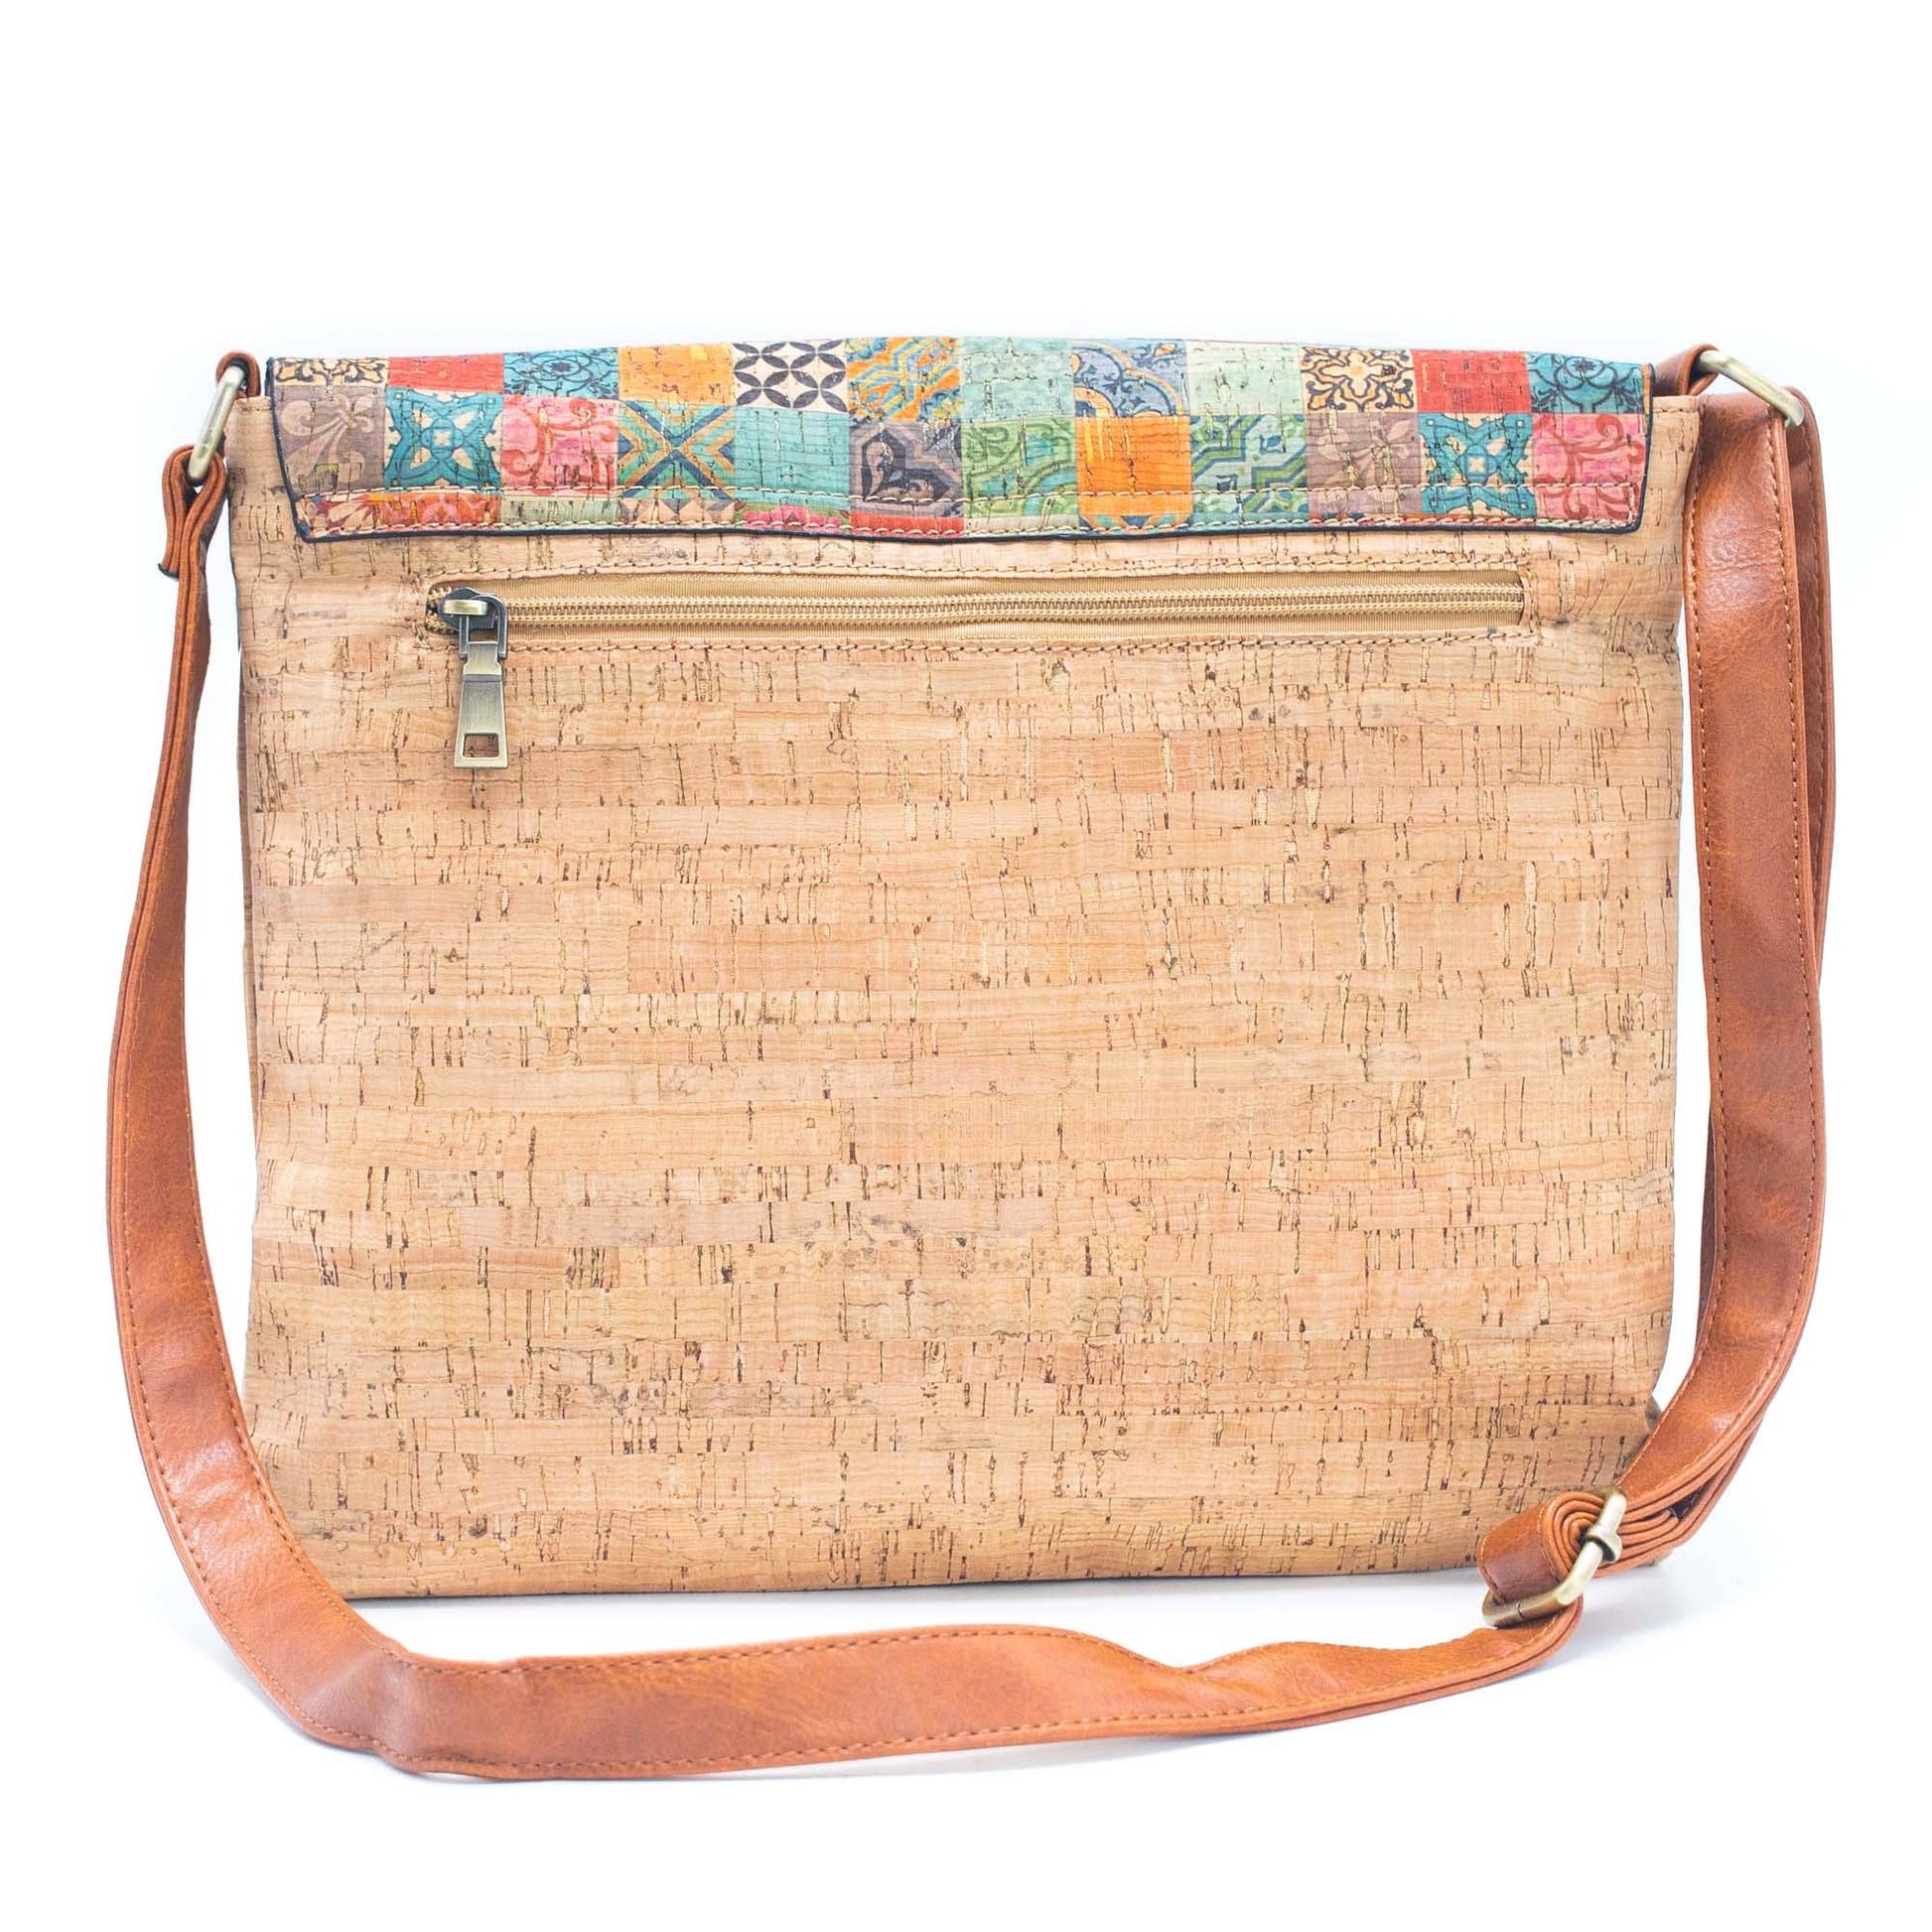 Cork Crossbody Bag with Mosaic and Floral Prints BAGD-464-5